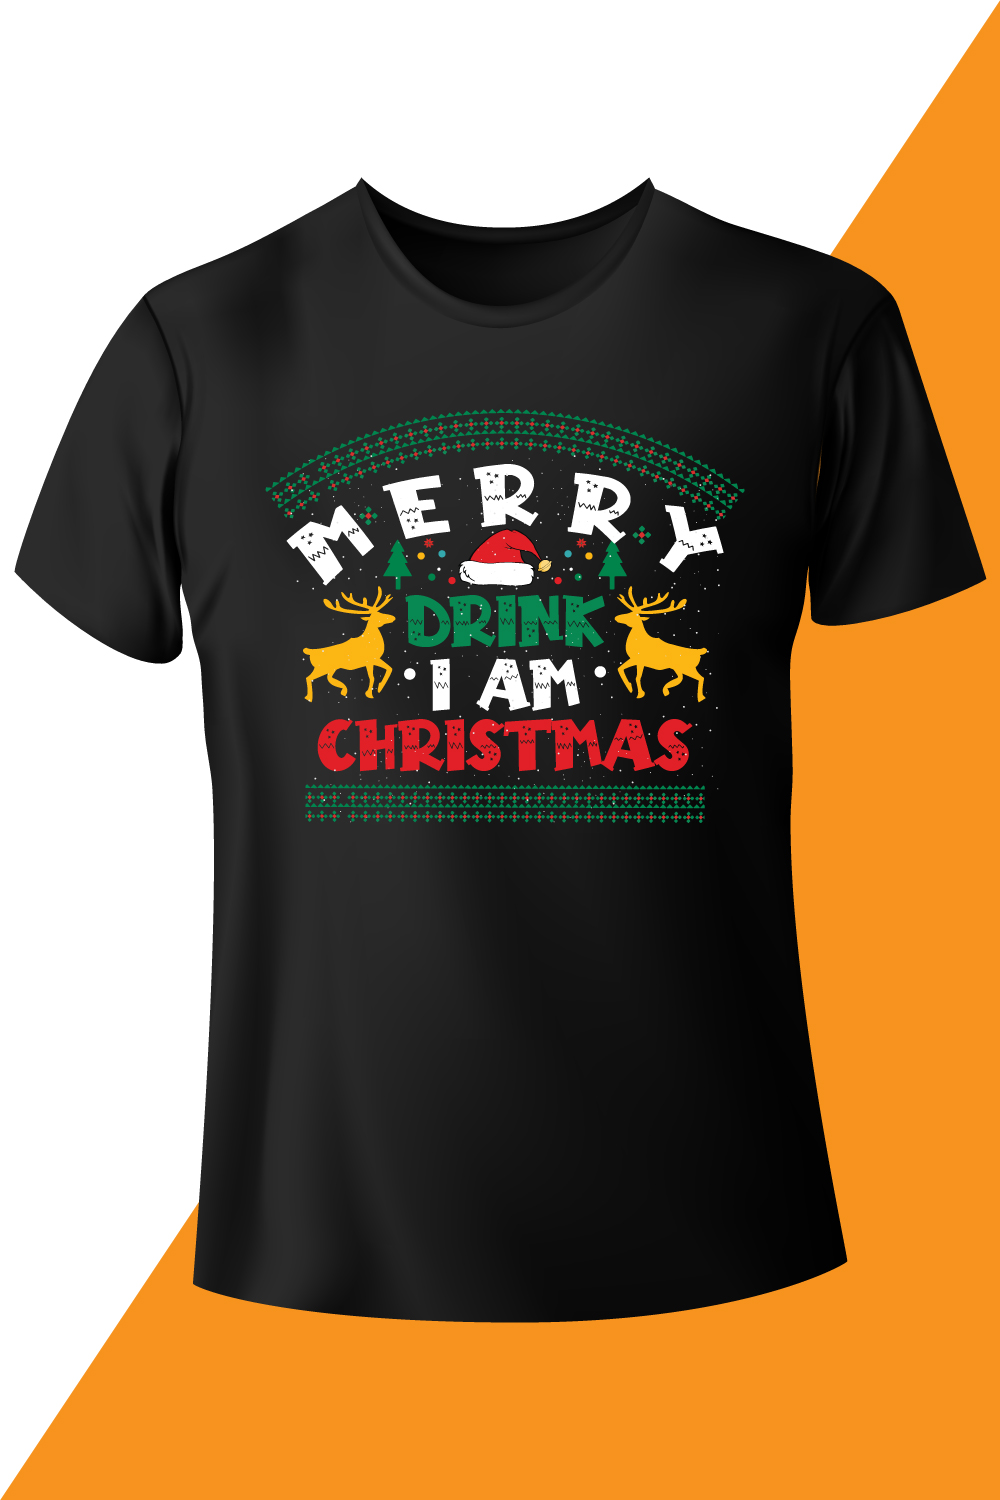 Image of a black t-shirt with a charming inscription merry drink i am christmas.